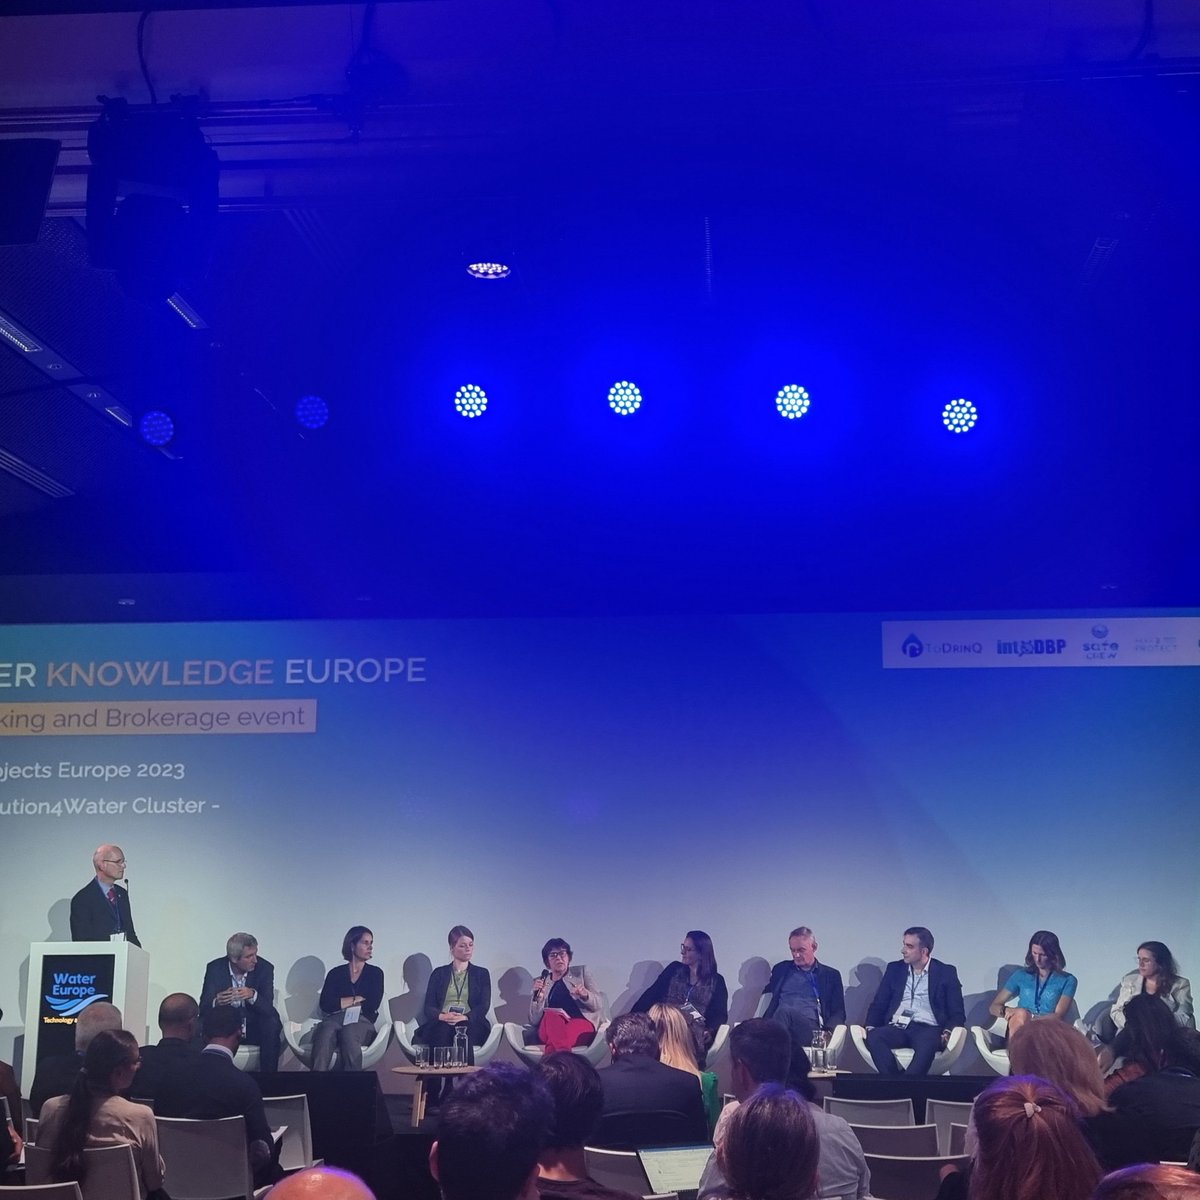 🎙'Think big & bold. Think how you can contribute to #water #security and #safety. Look at the upcoming local priorities and showcase how #zeropollution can become a reality in #Europe!' says @violetakuzmick1 during the panel discussion of #WPE2023 at #WKE2023 #WaterSmartSociety